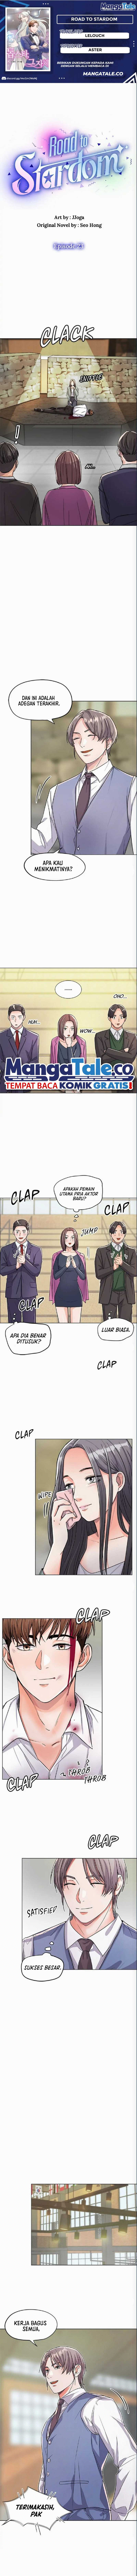 Road to Stardom Chapter 23